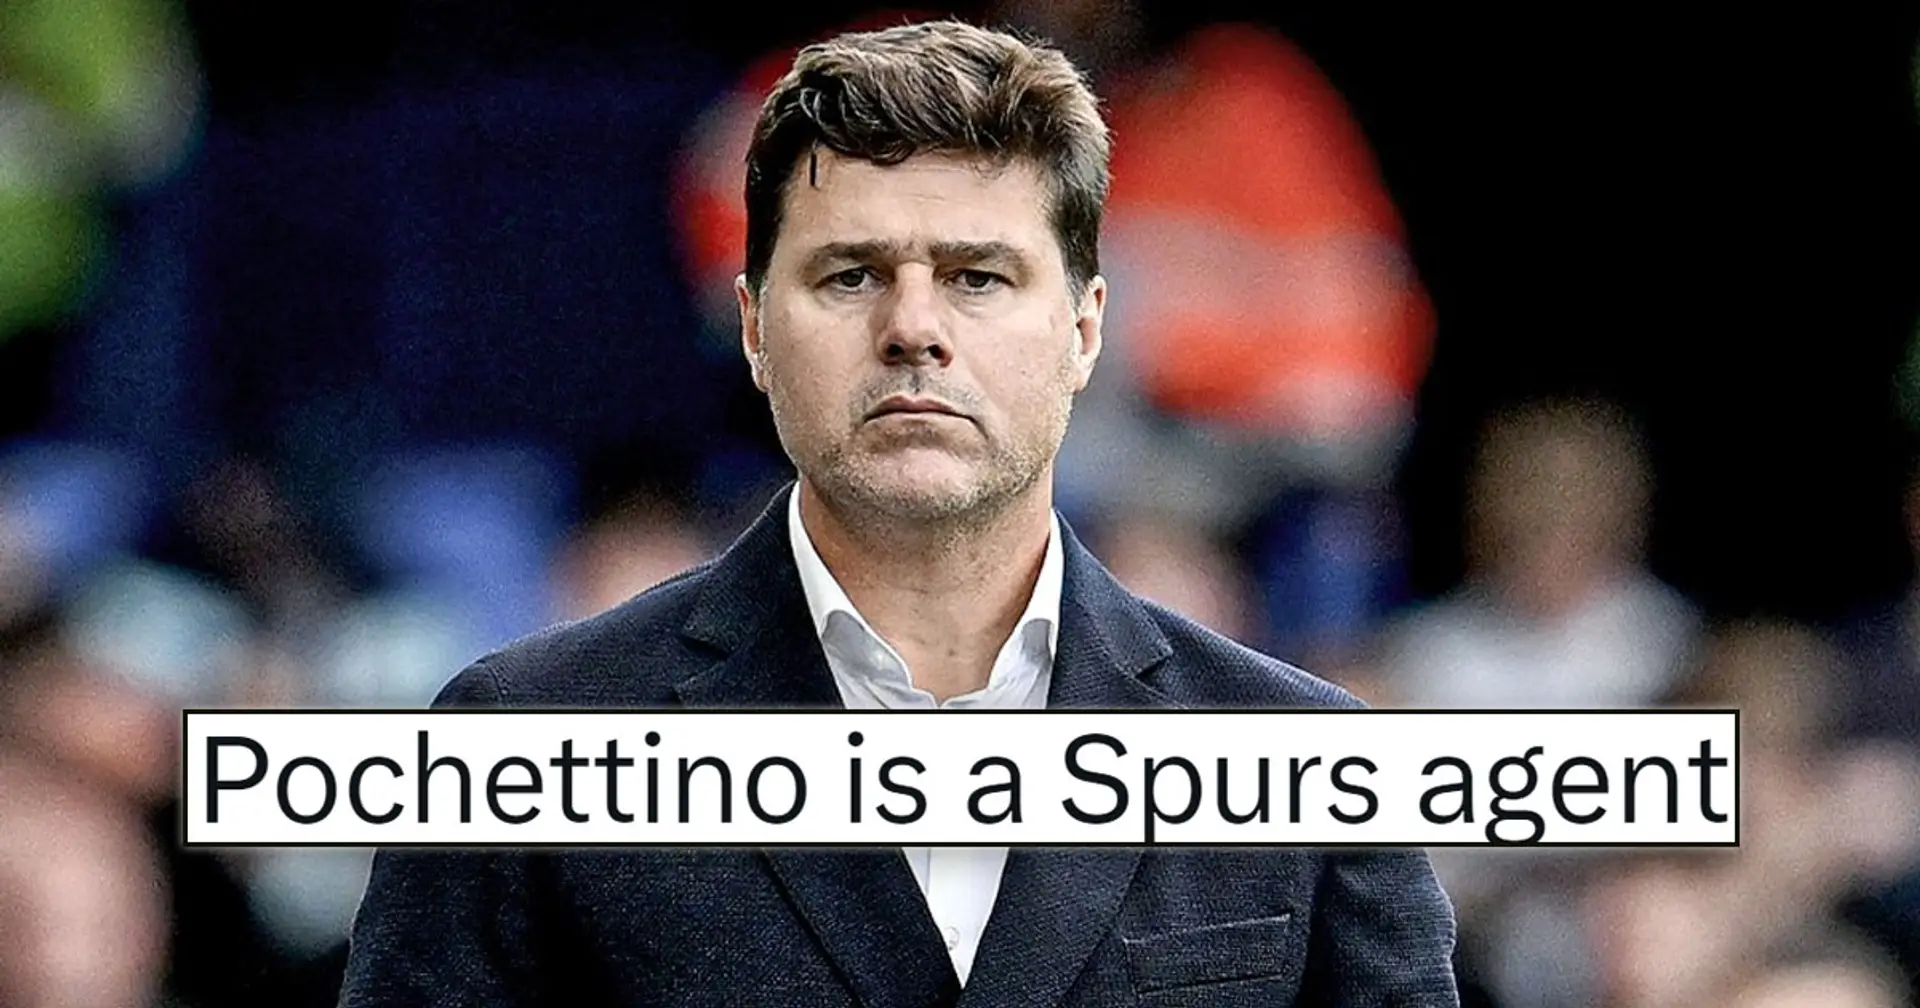 'Bottler manager': Some Chelsea fans hit out at Pochettino after Aston Villa defeat